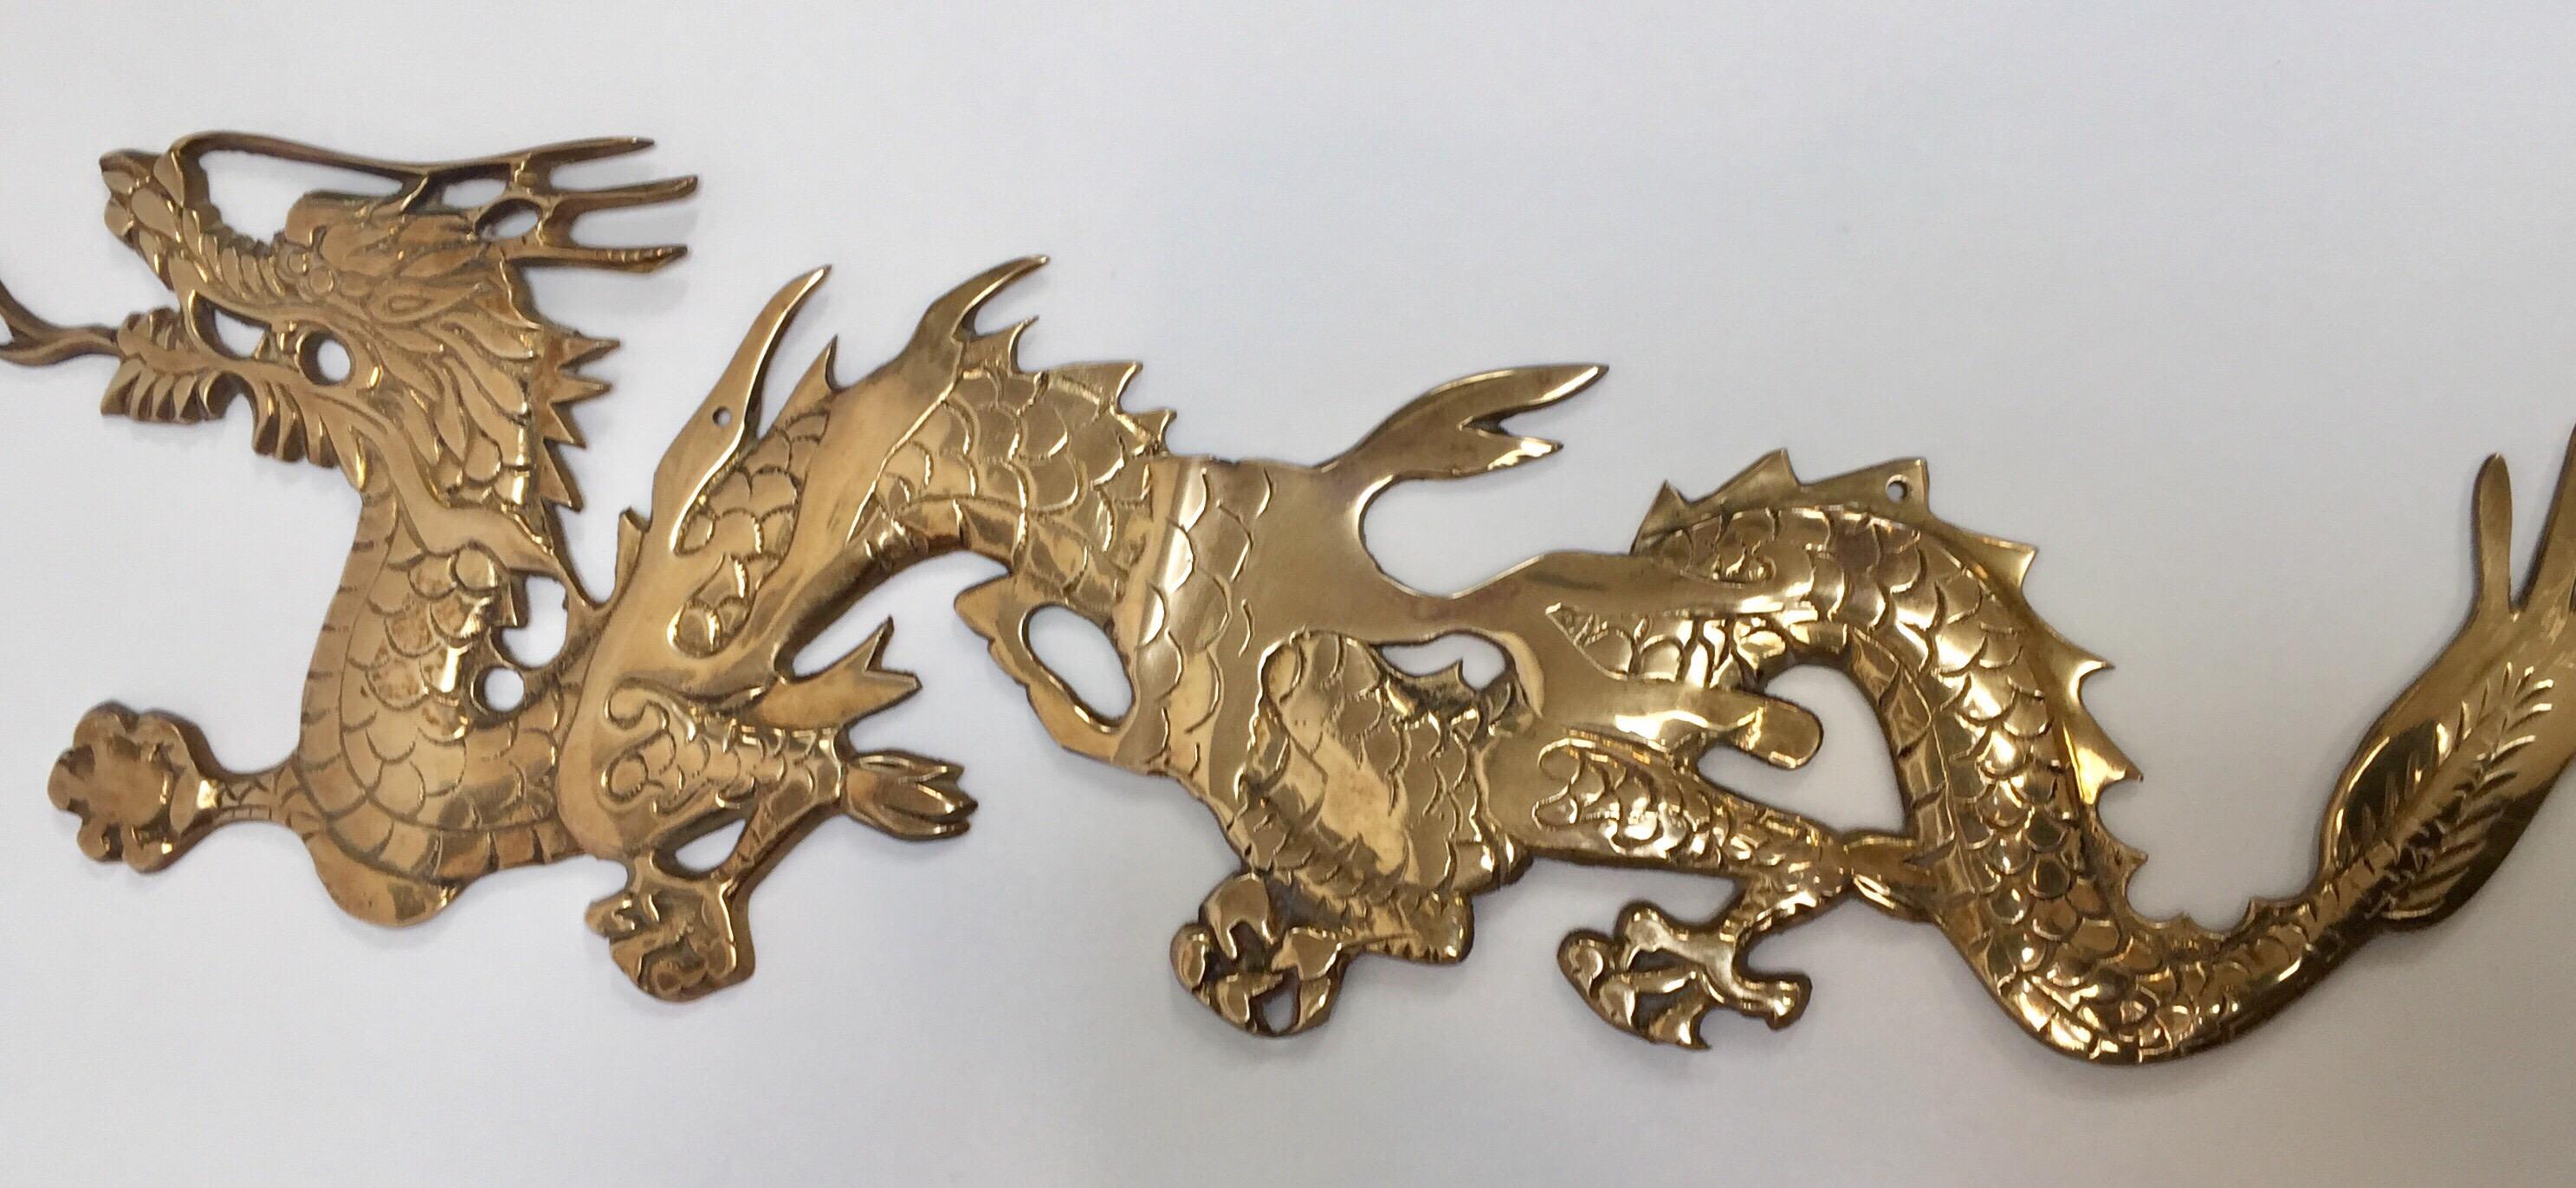 Large Pair of Asian Cast Brass Dragons Chasing a Ball Wall Mount 6